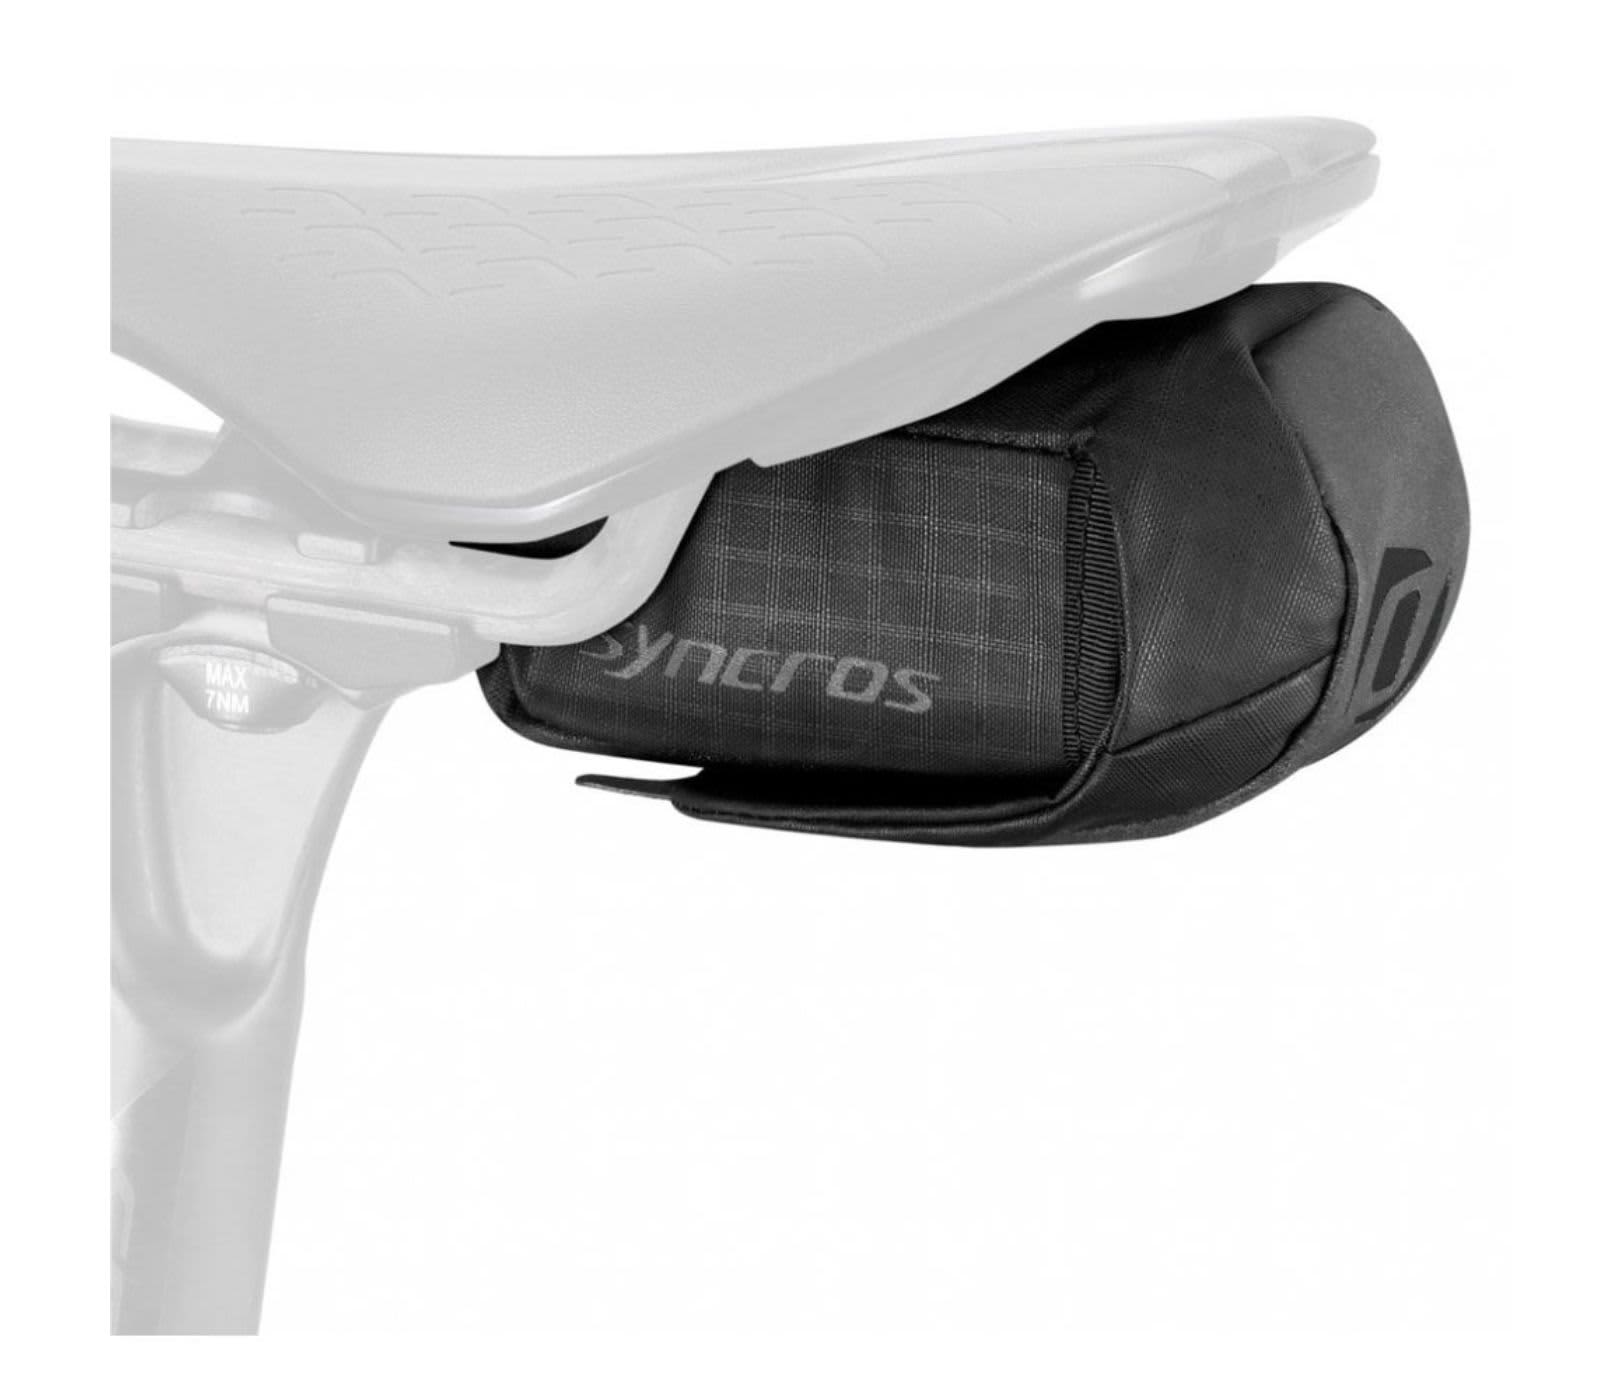 Syncros IS Direct Mount Speed 200 Saddle Bag